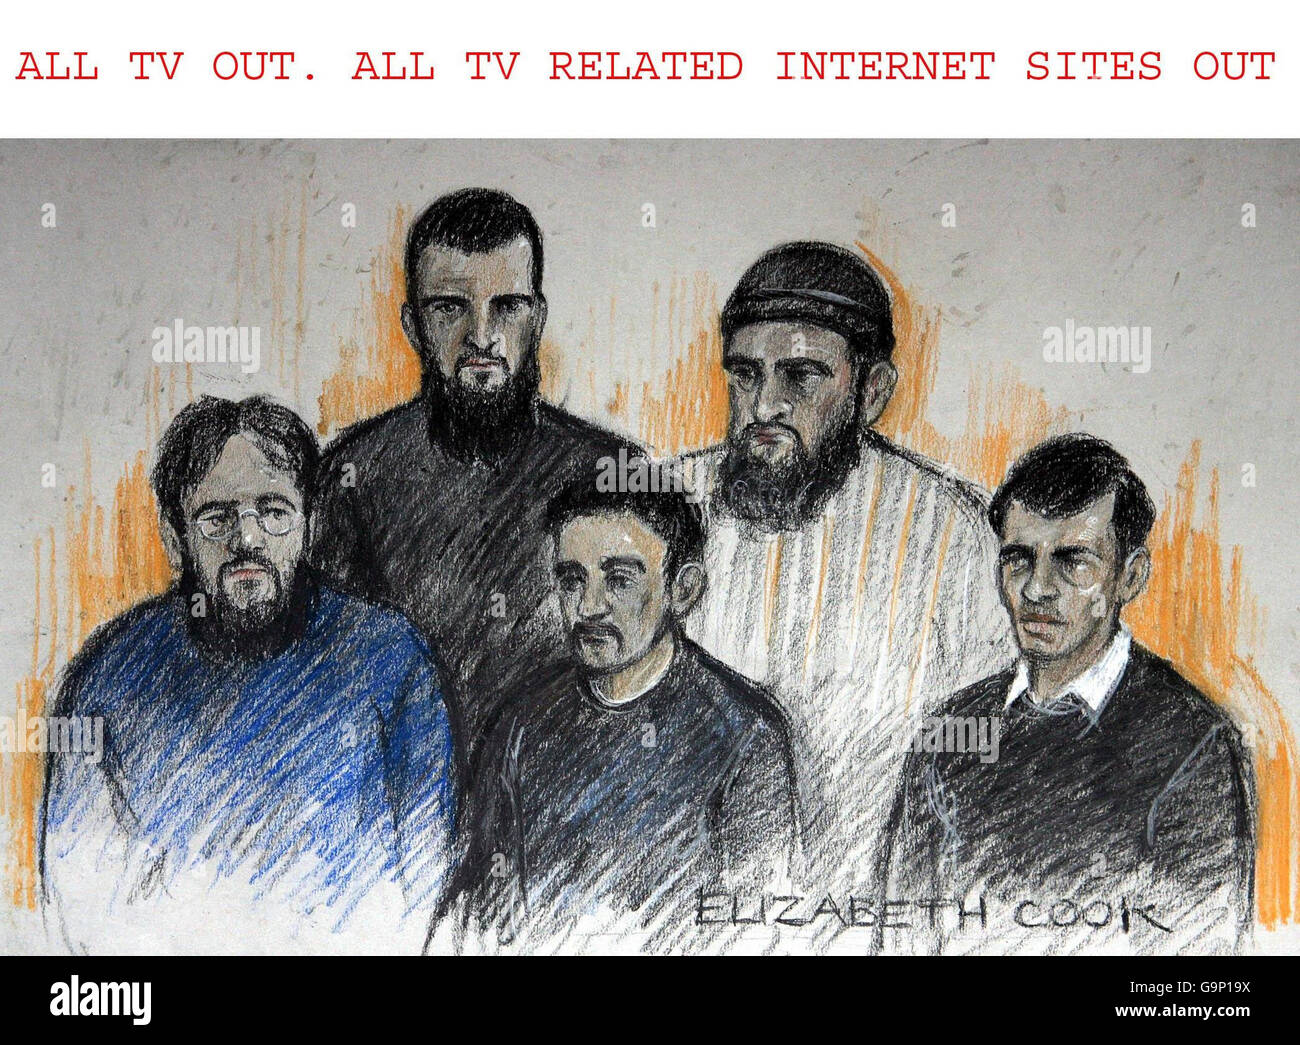 Court illustration by Elizabeth Cook showing (left to right) Mohammed Irfan, Parviz Khan, Amjad Mahmood, Hamid Elasmar and Zahoor Iqbal at Westminster Magistrates Court charged with terror offences. Stock Photo